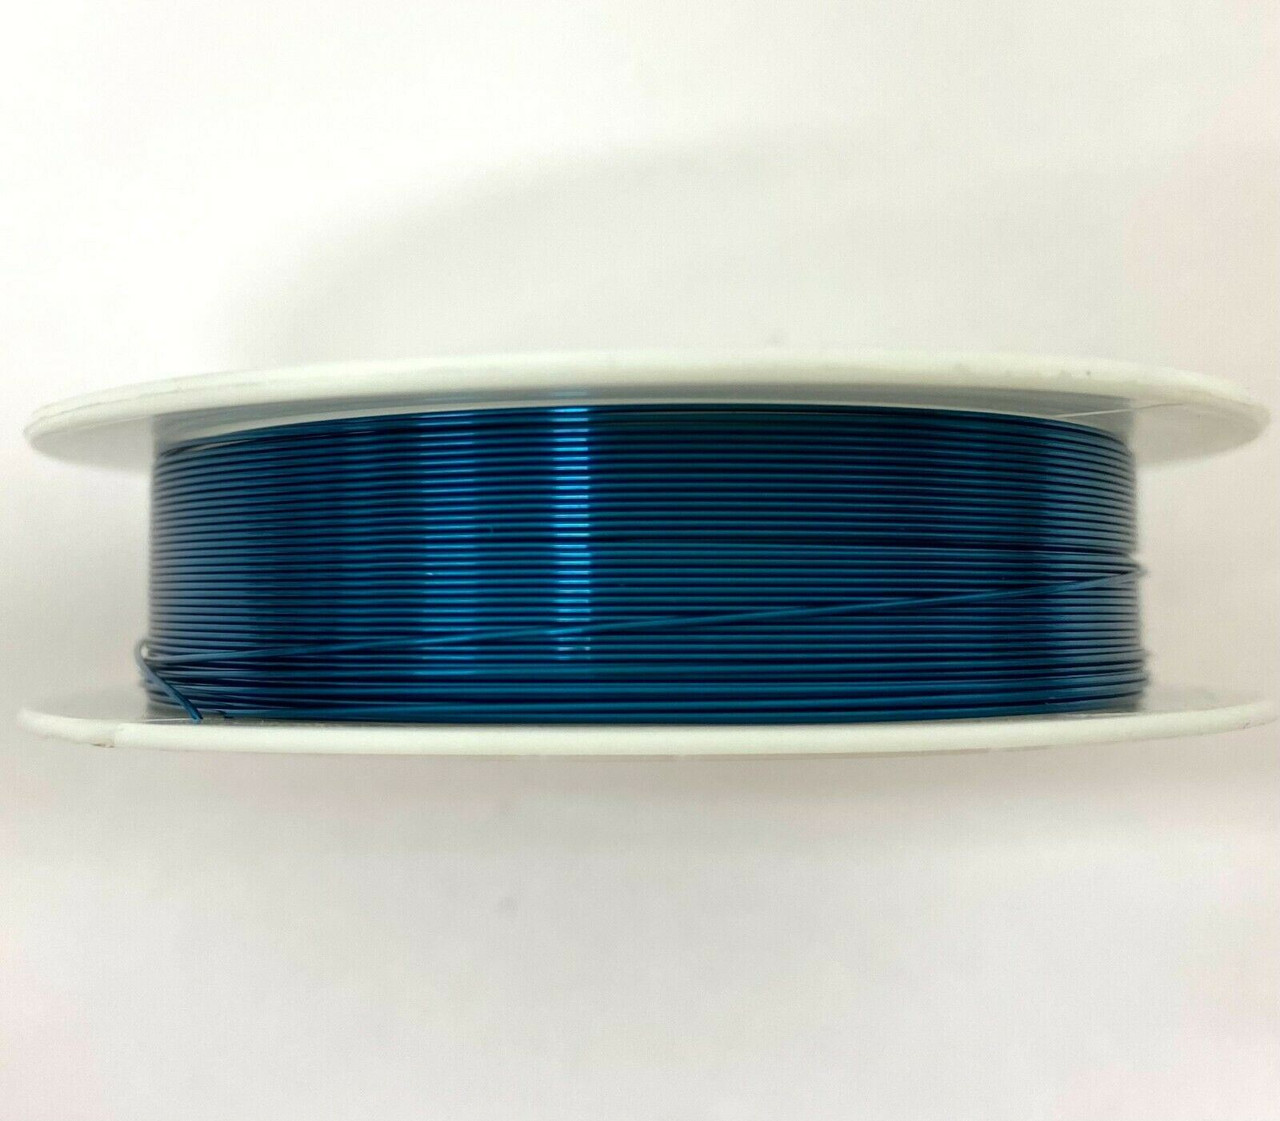 Roll of Copper Wire, 0.3mm thickness, OCEAN BLUE colour, approx 26m length